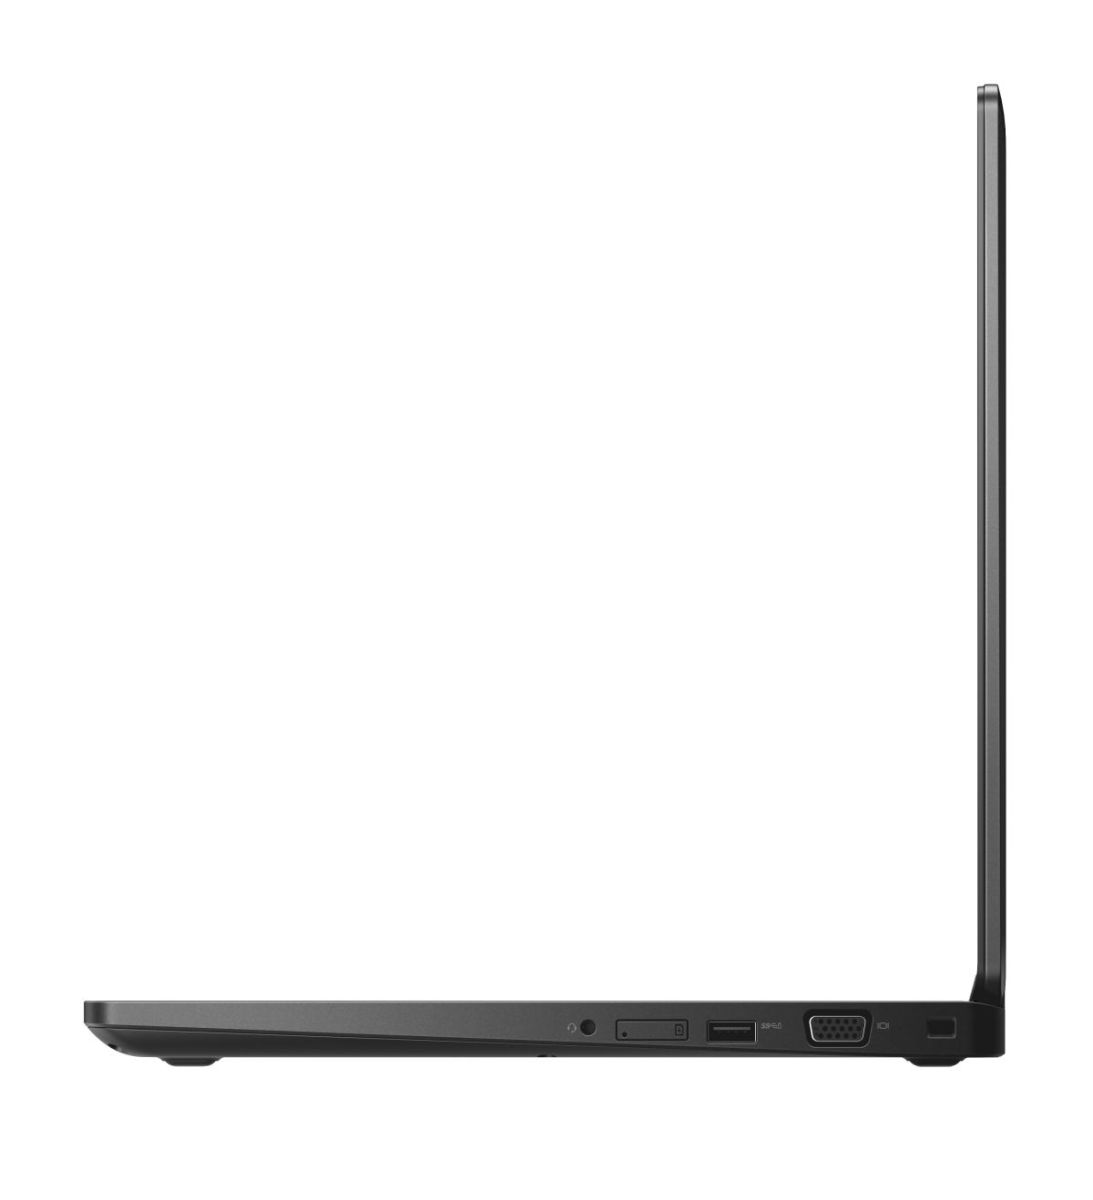 DELL Latitude 5590 - 5590-5959 laptop specifications